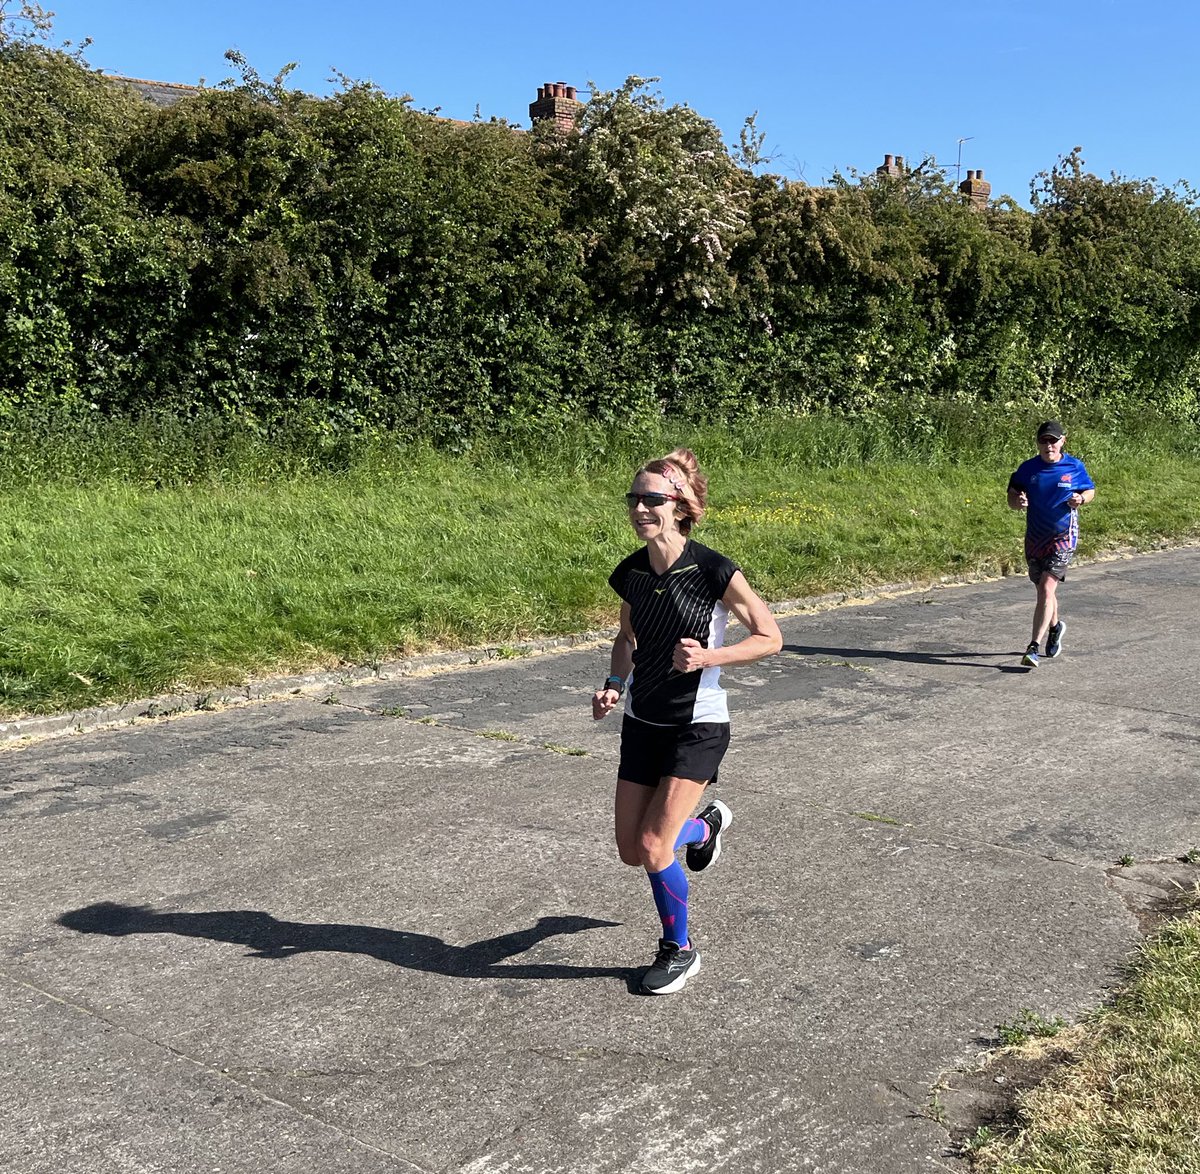 … and very happy to have chance to encourage Tremorfa’s own regular car park marshall @notRachelBrown who routinely gets me fired up for this course! #RunForTheSun